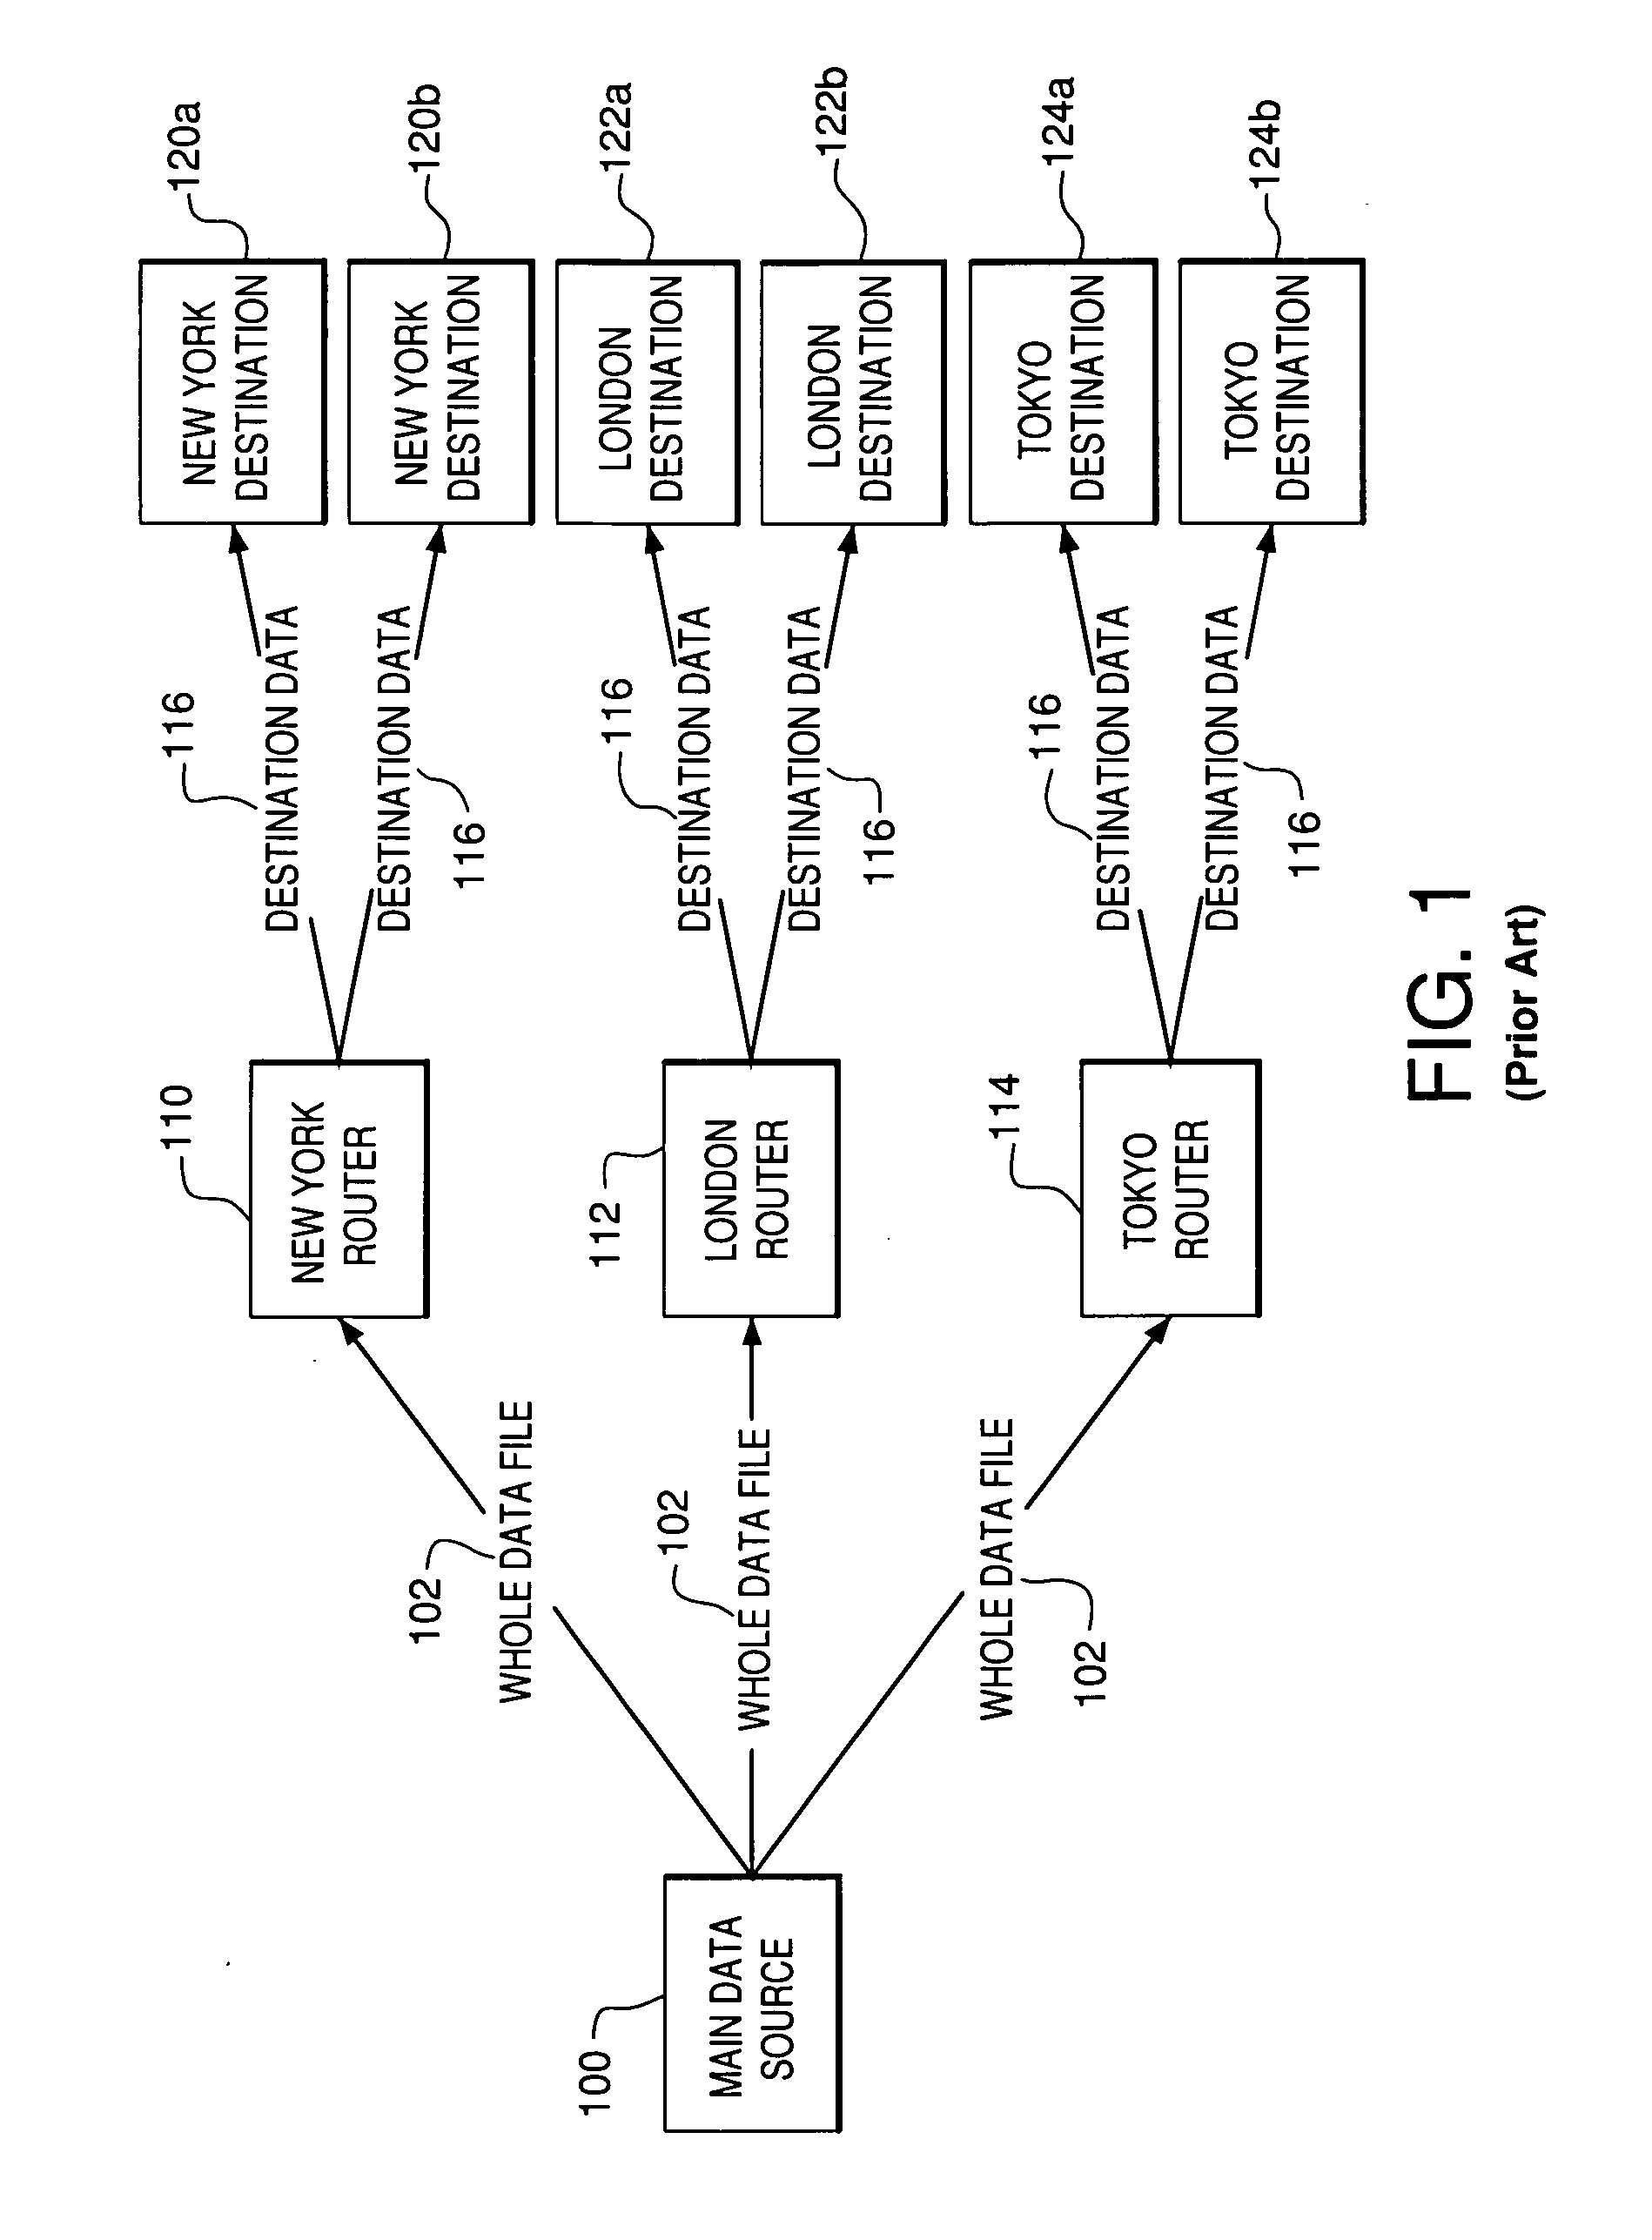 System and method for message processing and routing